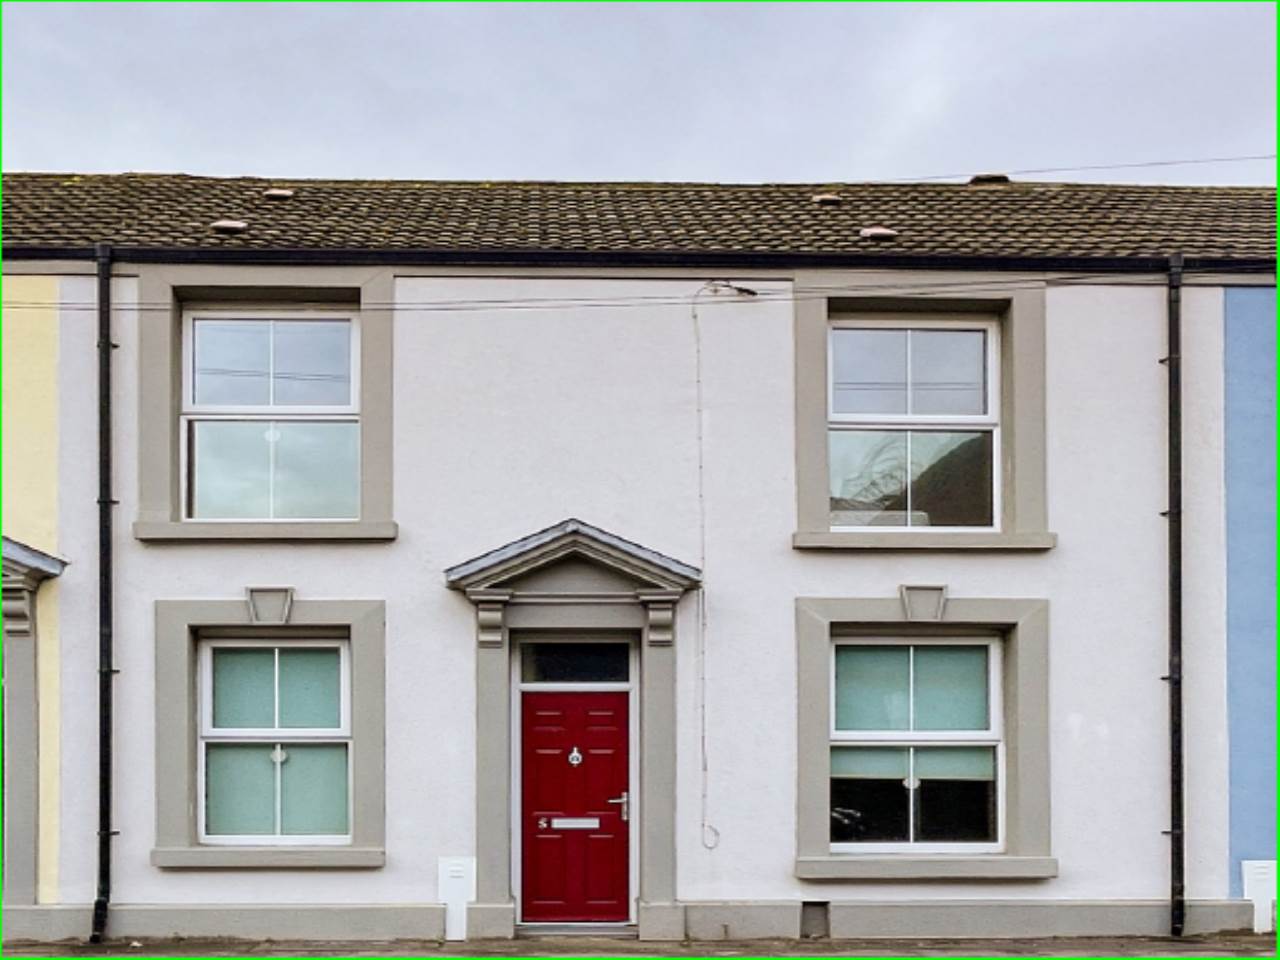 6 bed house to rent in GLAMORGAN STREET, CITY 5